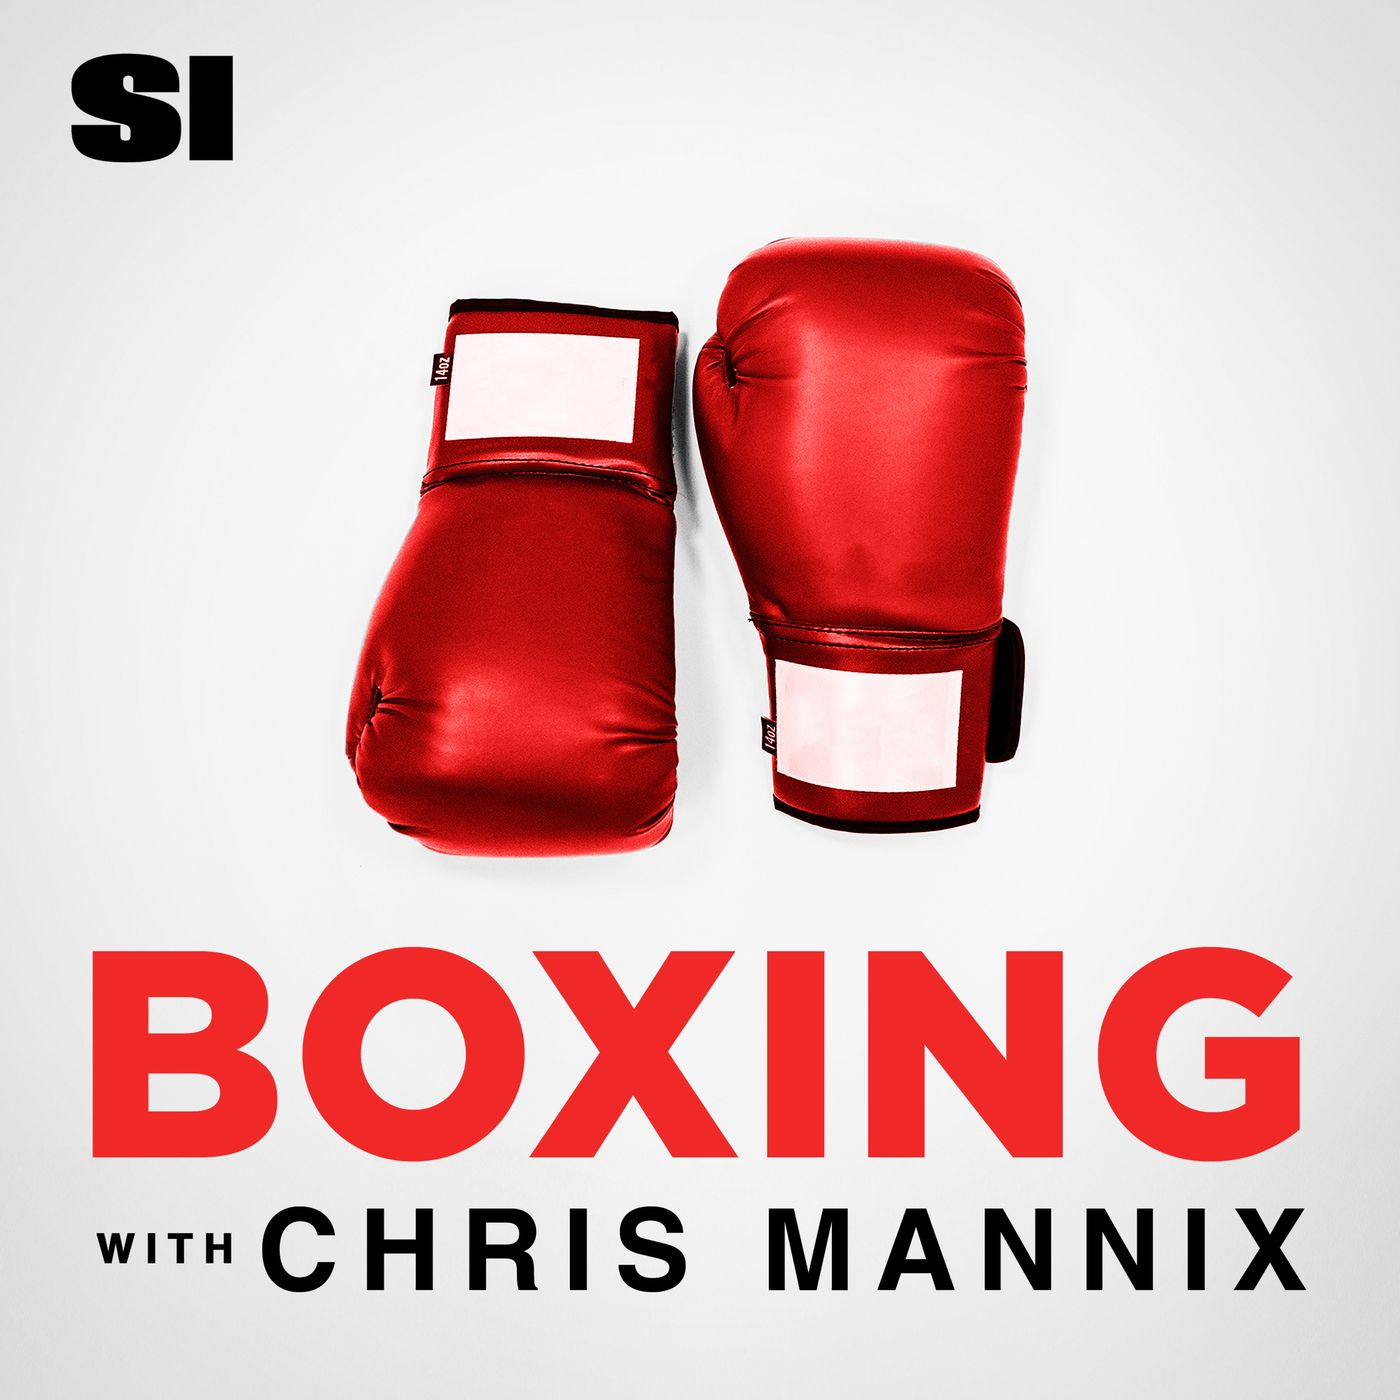 A highlight from Boxing with Chris Mannix - The latest with Tank Davis and Ryan Garcia